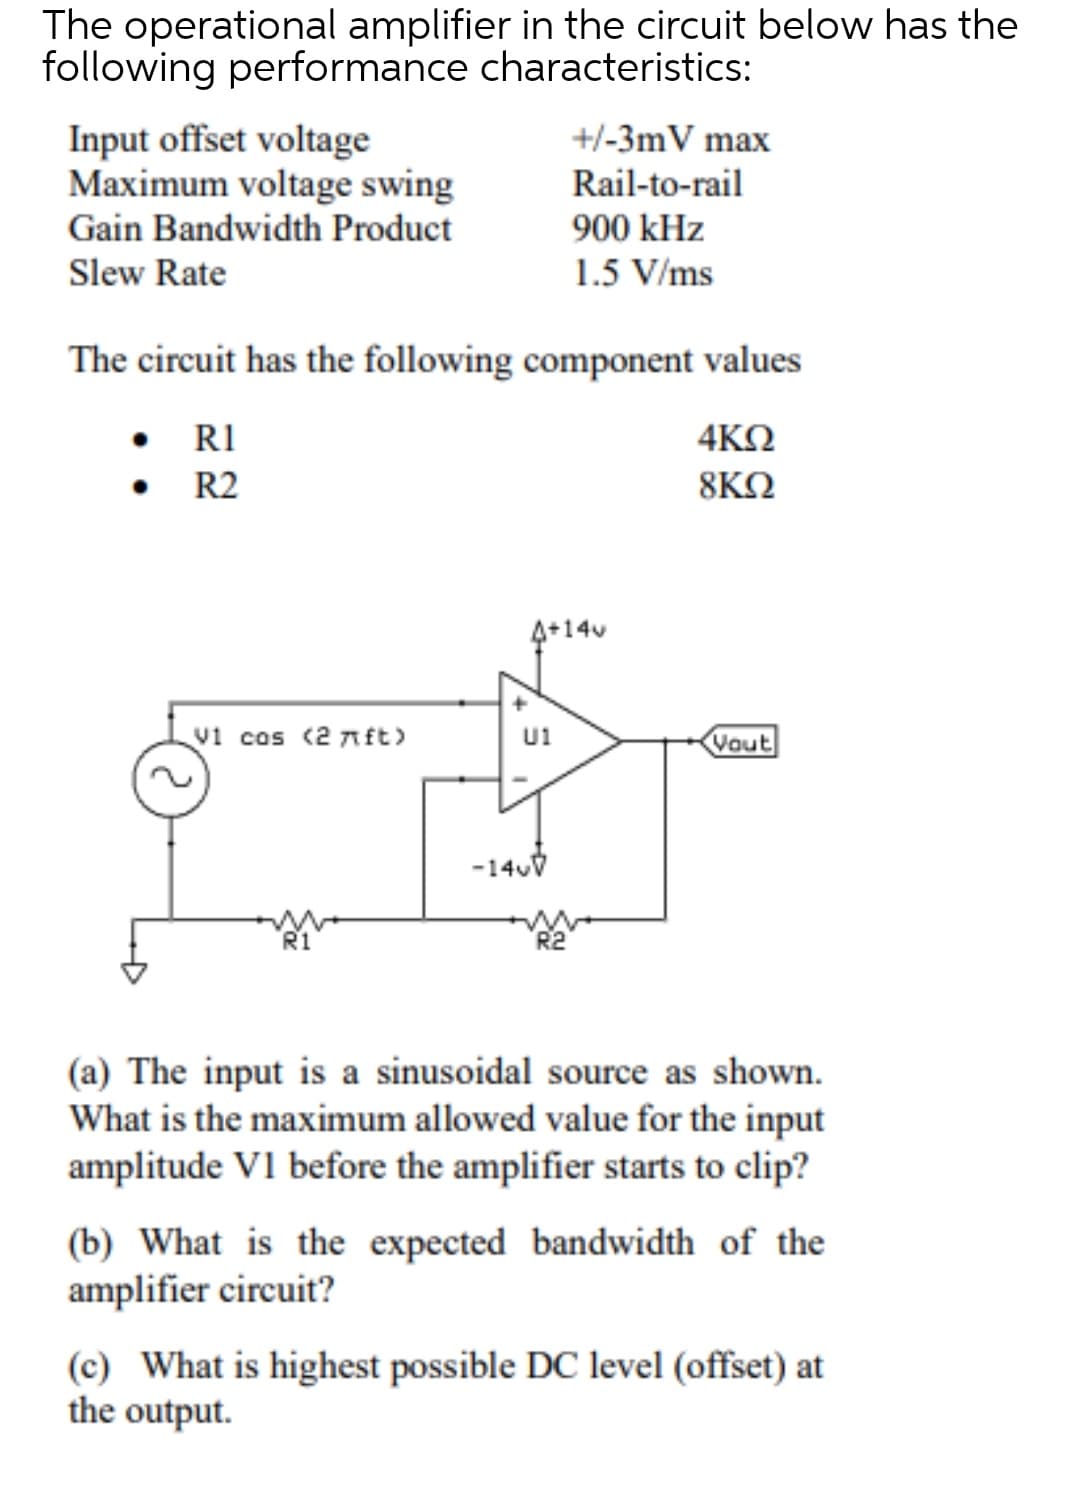 The operational amplifier in the circuit below has the
following performance characteristics:
Input offset voltage
Maximum voltage swing
Gain Bandwidth Product
+/-3mV max
Rail-to-rail
900 kHz
Slew Rate
1.5 V/ms
The circuit has the following component values
• RI
4ΚΩ
R2
8ΚΩ
4+14v
v1 cos (2 nft>
Vout
U1
-140V
(a) The input is a sinusoidal source as shown.
What is the maximum allowed value for the input
amplitude V1 before the amplifier starts to clip?
(b) What is the expected bandwidth of the
amplifier circuit?
(c) What is highest possible DC level (offset) at
the output.
